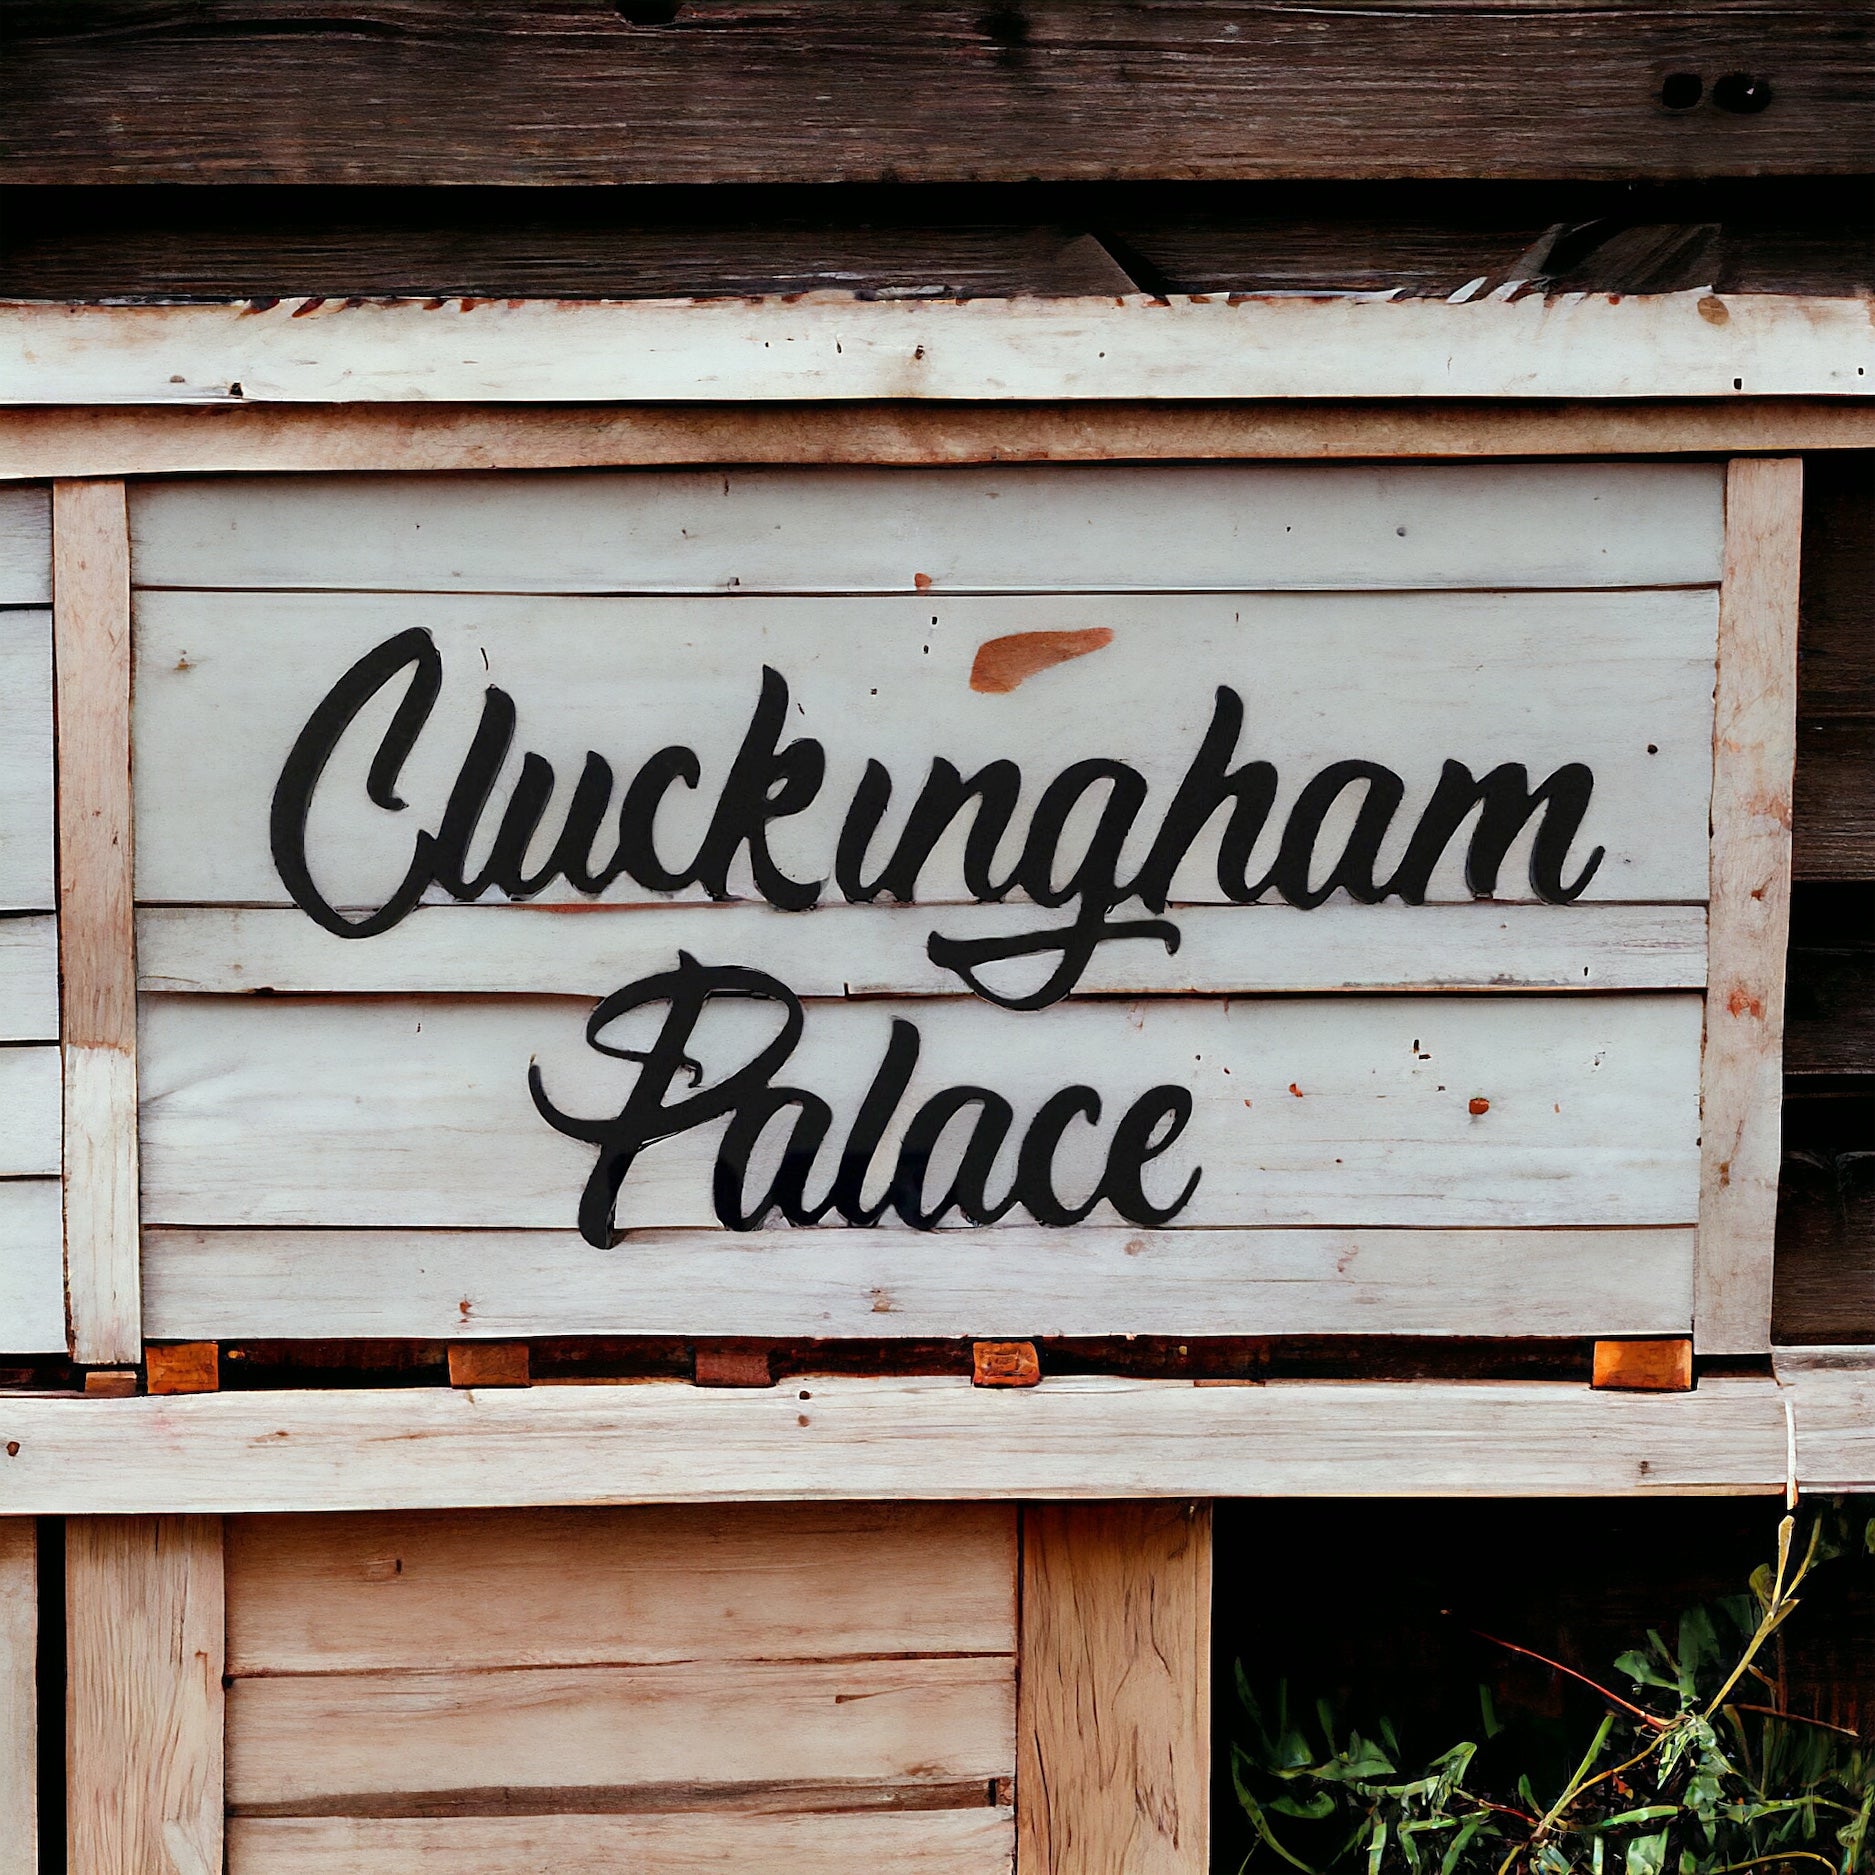 Cluckingham Palace Coop Chicken Sign - The Renmy Store Homewares & Gifts 